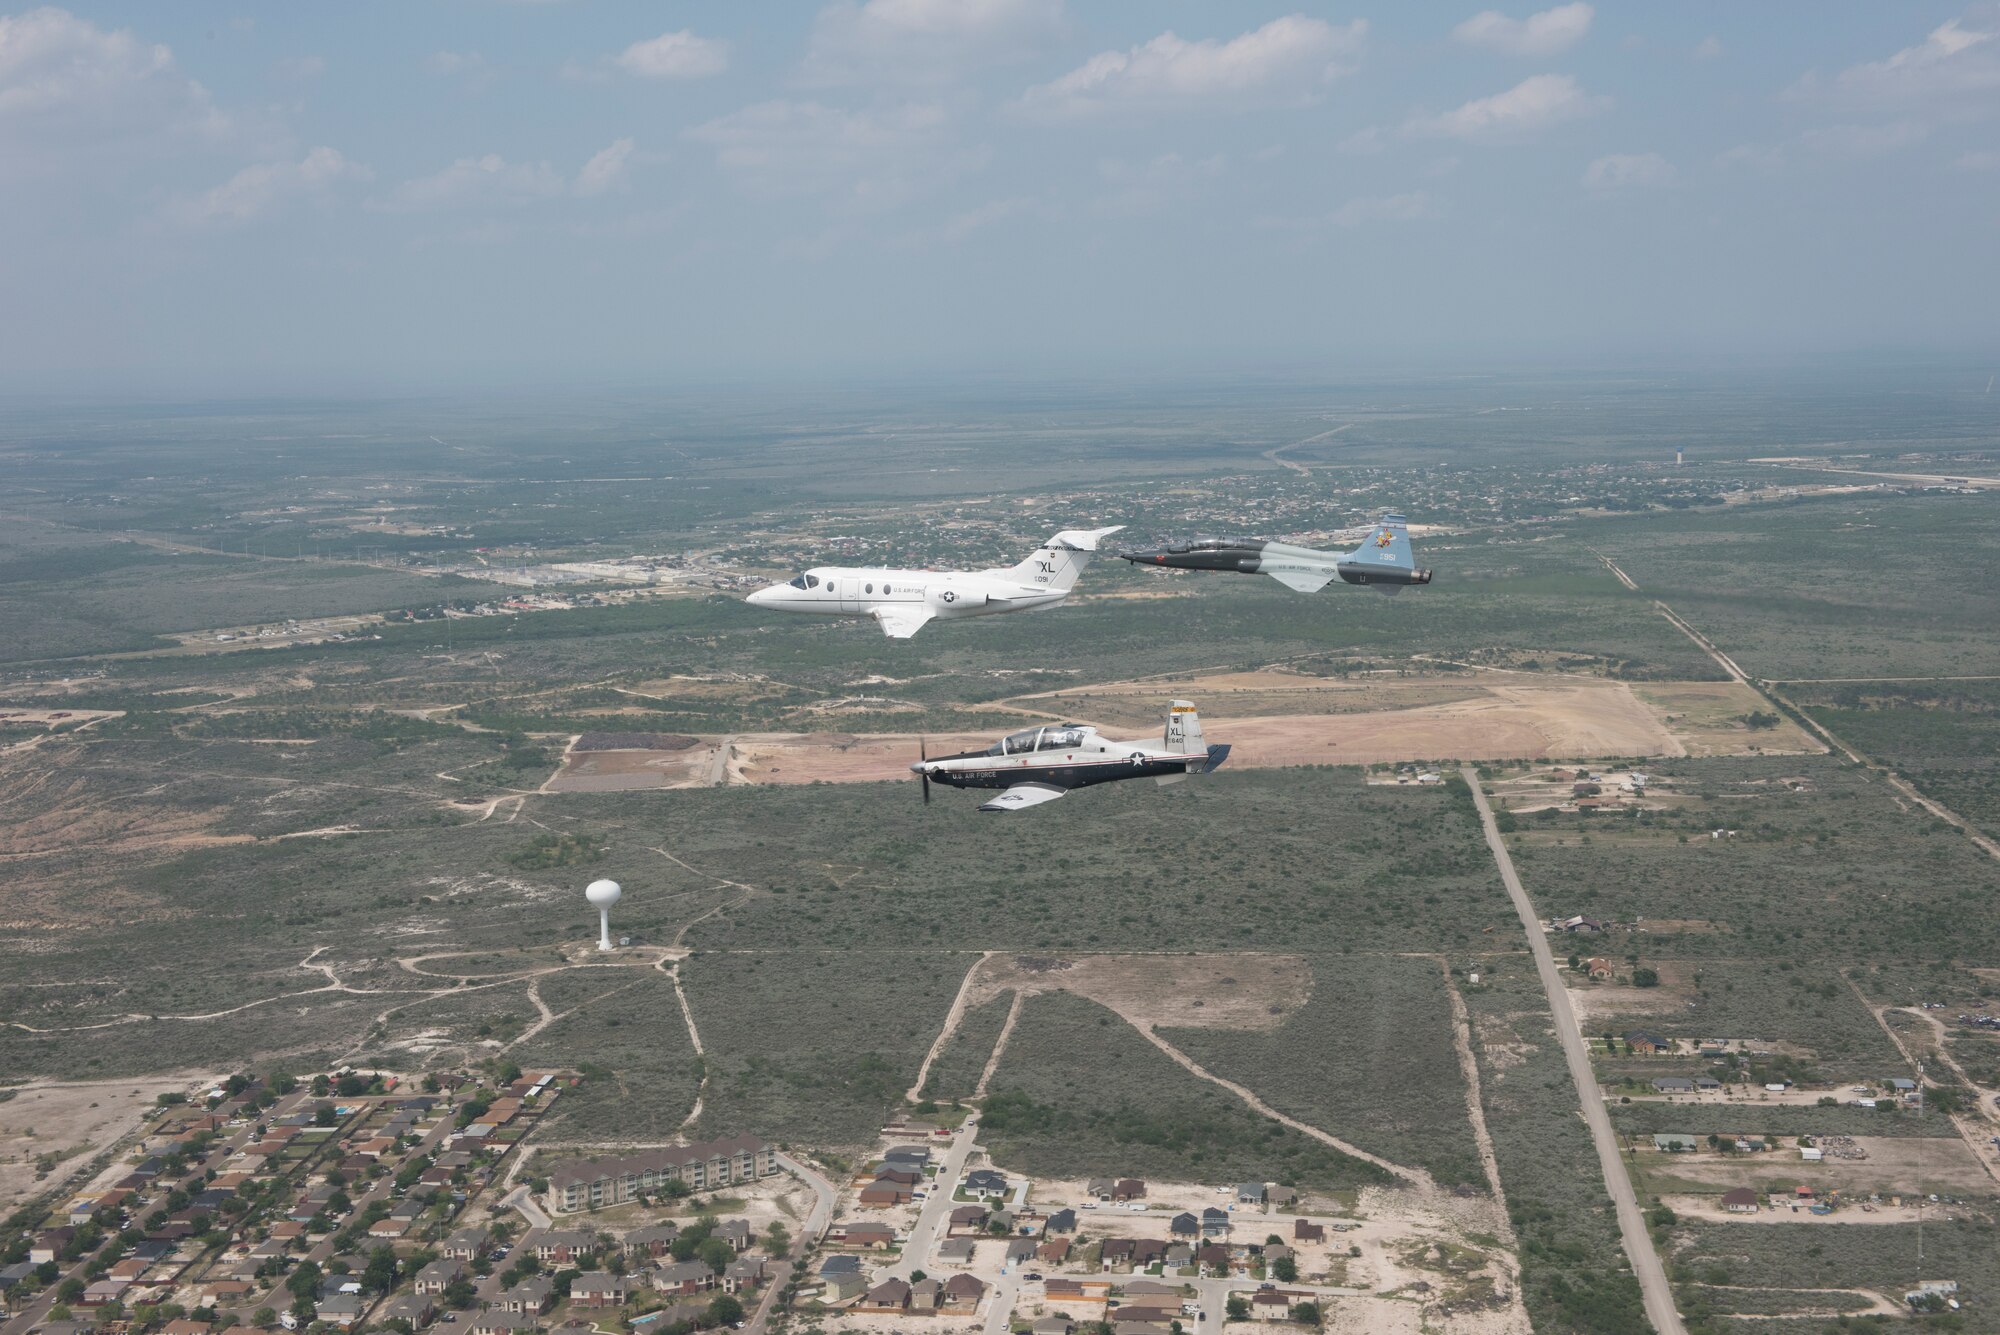 T-6 Texan II, T-1A Jayhawk and a T-38C Talon, assigned to Laughlin Air Force Base, Texas, perform a flyover in Del Rio, Texas, May 21, 2020. Laughlin performed flyovers in three Texas cities as a part of the America Strong America Salutes Campaign, to show its gratitude for all front-line responders, economy sustainers and community members in the COVID-19 pandemic. (U.S. Air Force photo by Master Sgt. JT May III)